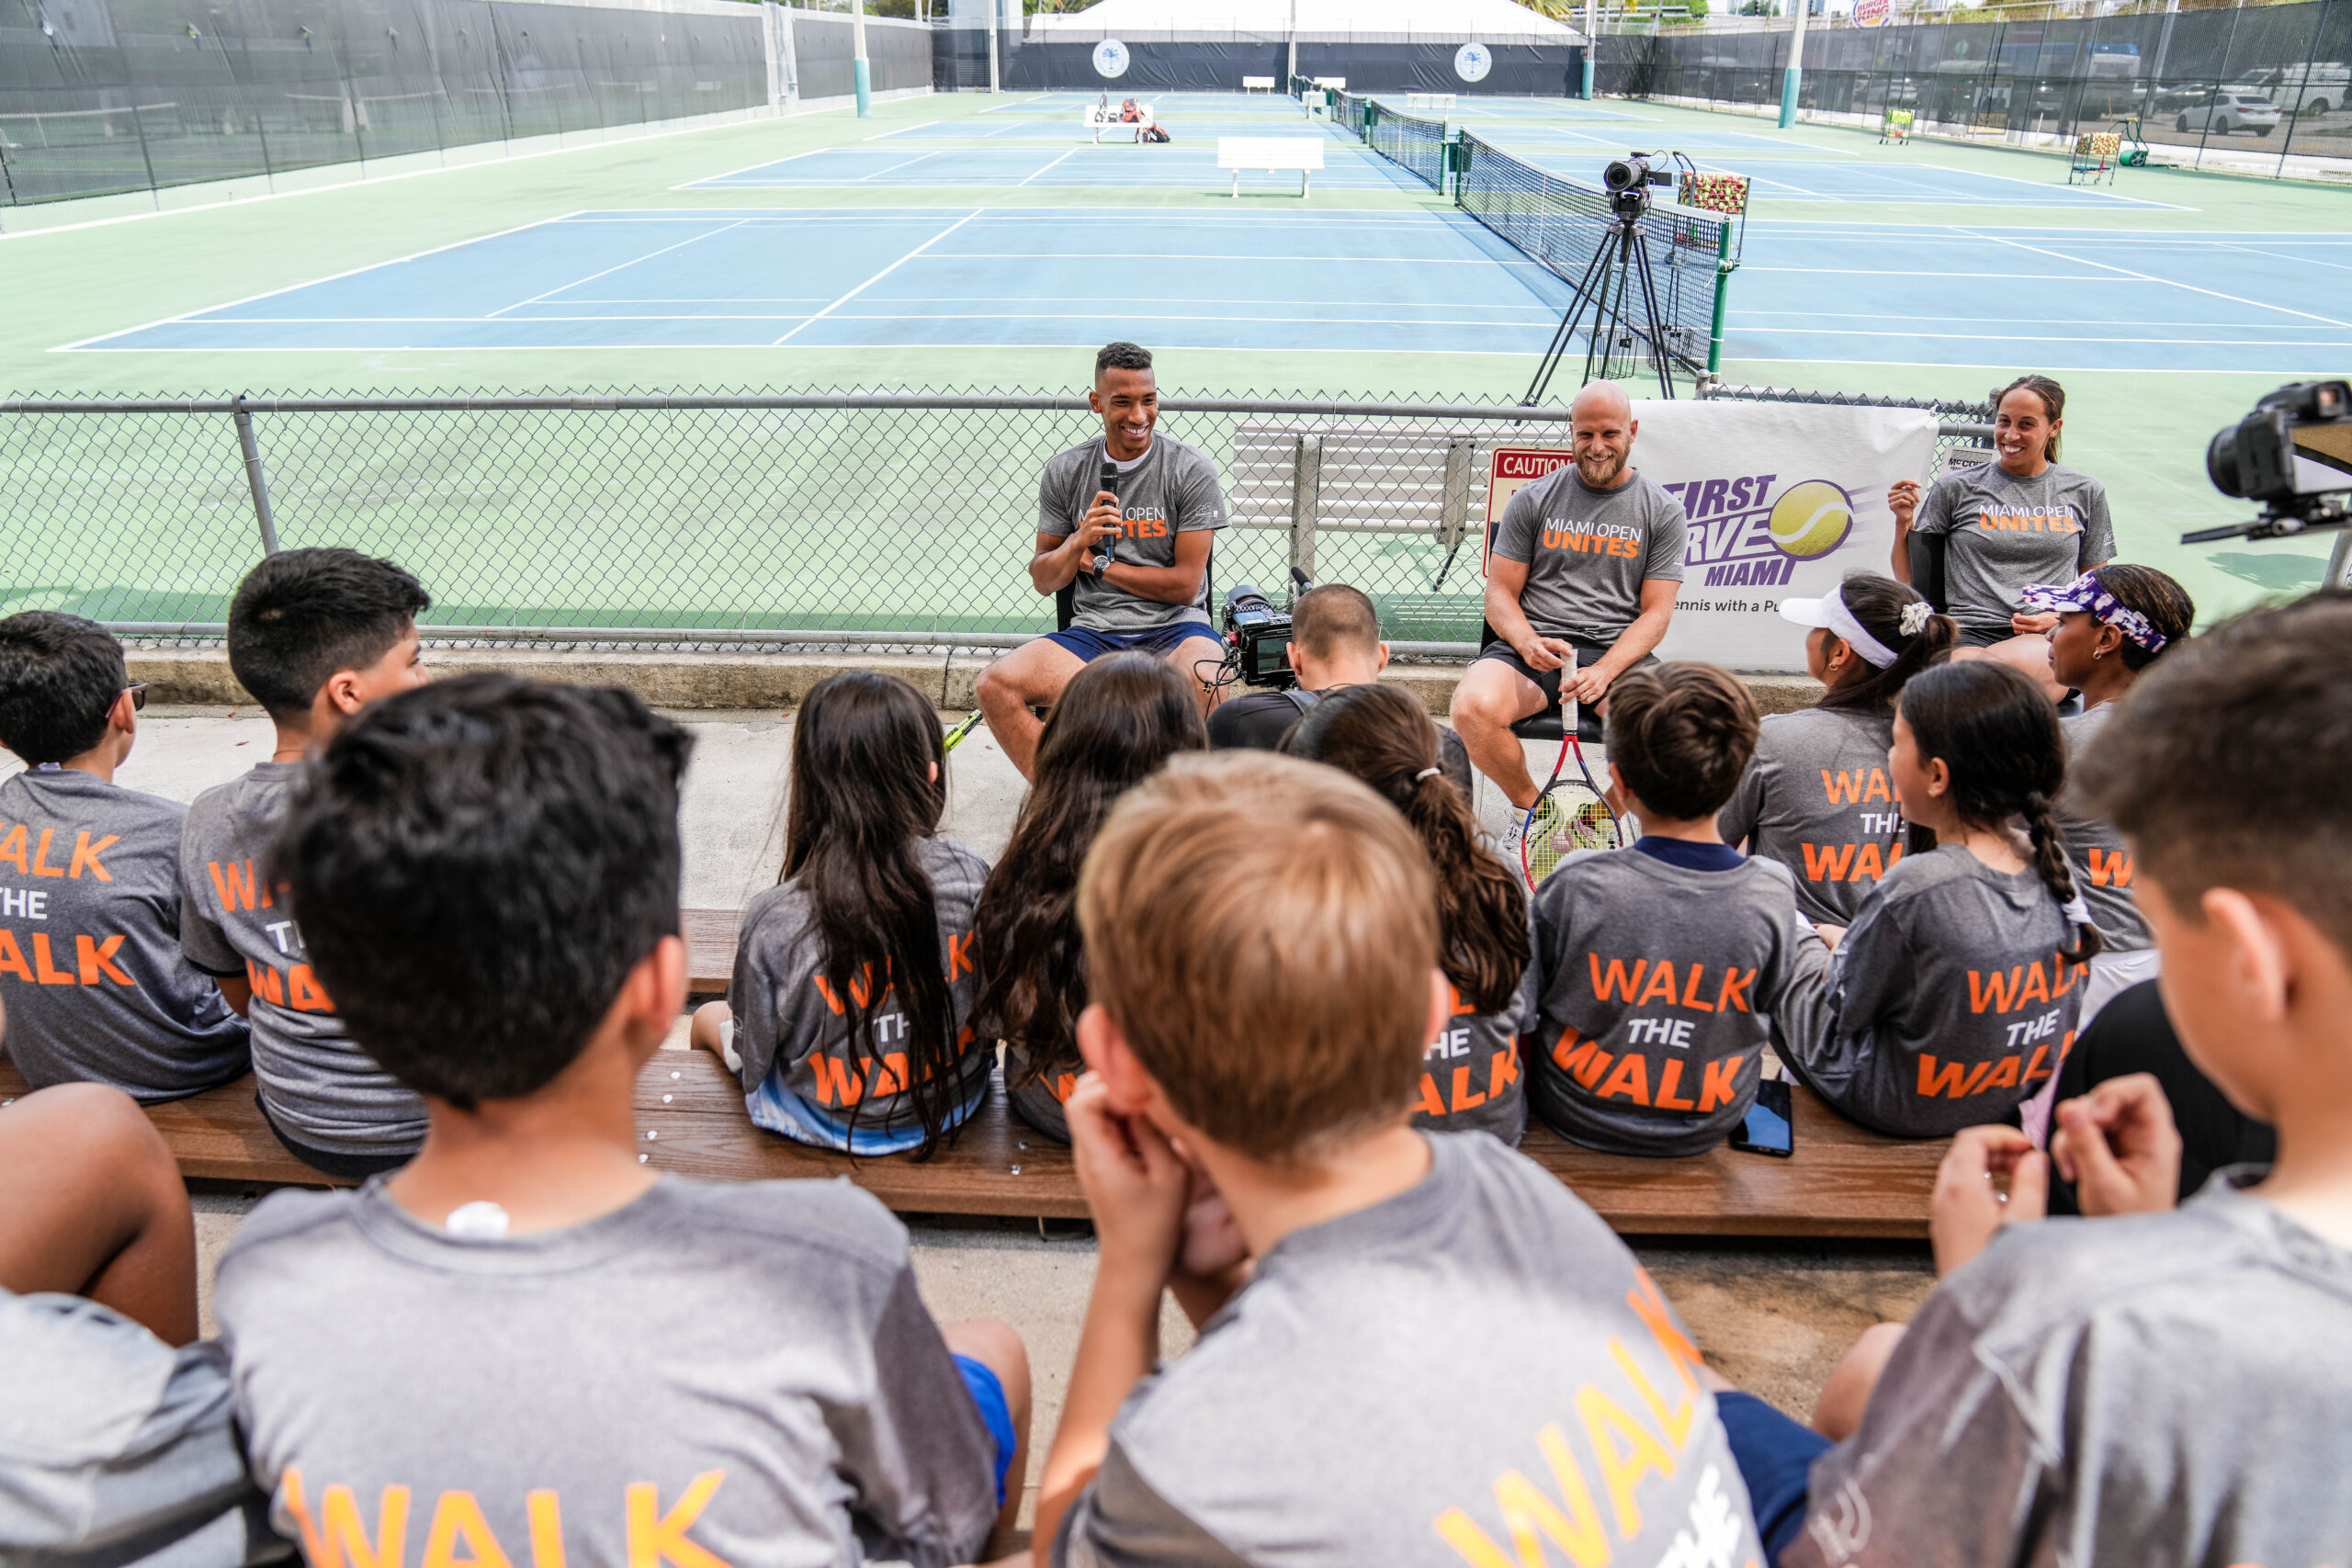 Felix Auger Aliassime, Denis Kudla and Madison Keys speak to the kids during the Big Brothers, Big Sisters event in Moore Park in Miami on March 20, 2023.